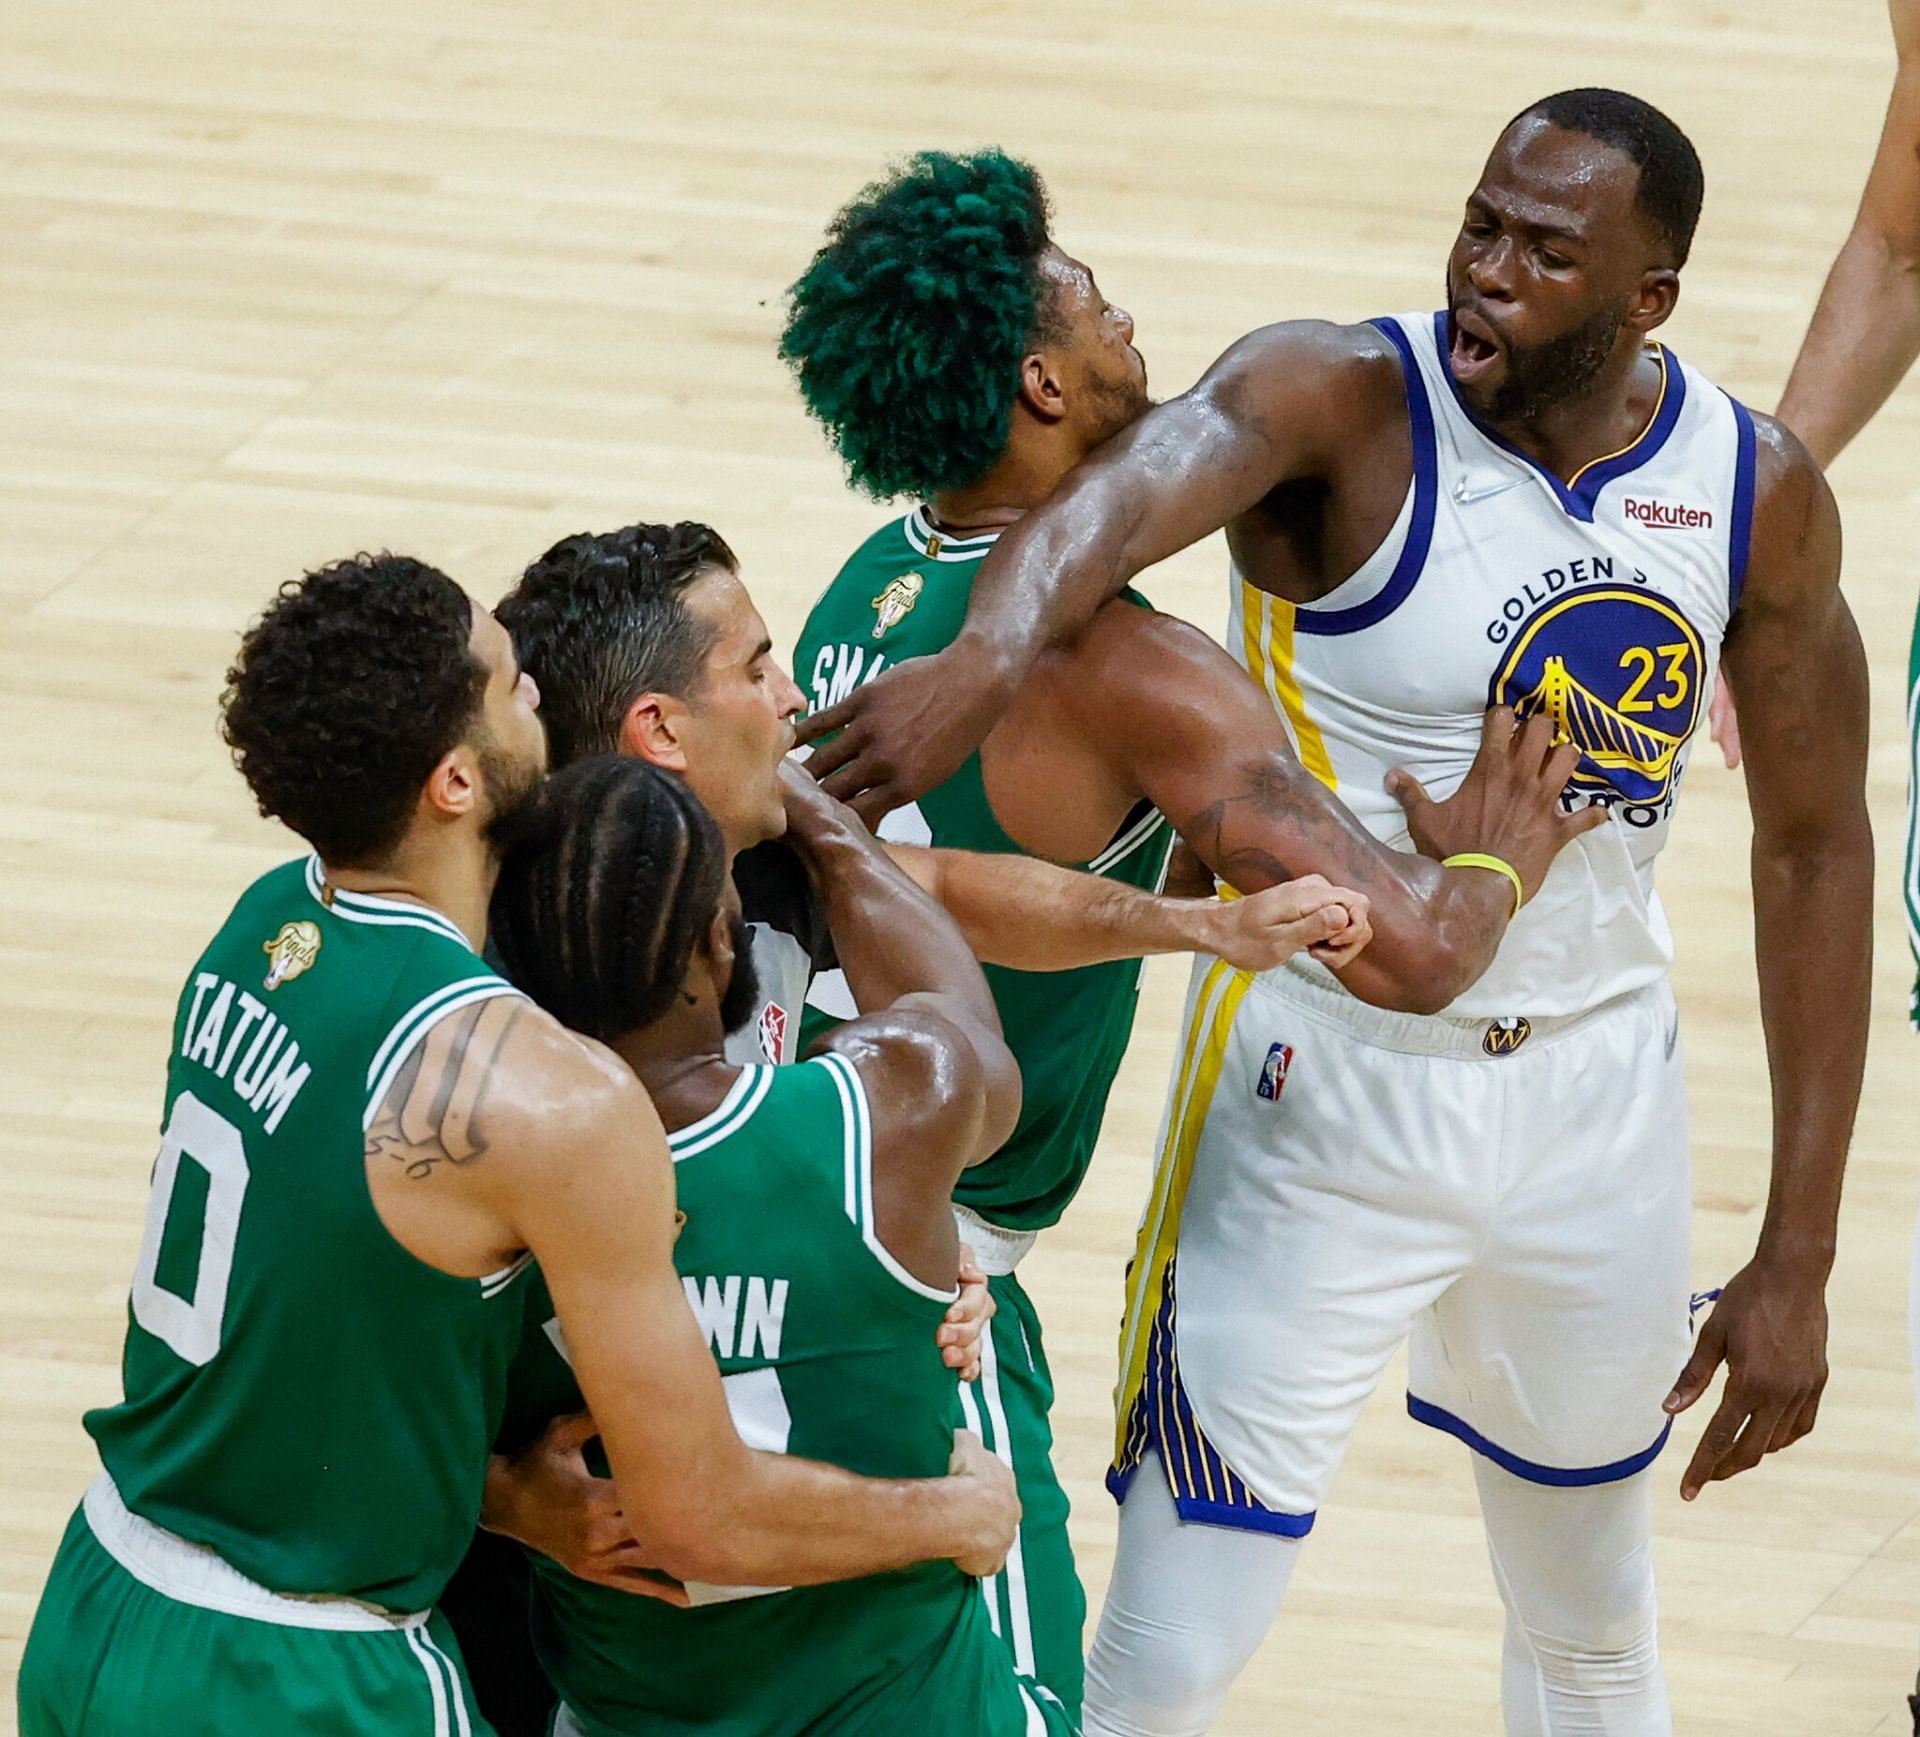 Draymond Green could be just adding more fuel for the Boston Celtics ahead of Game 6 with his latest comments. [Photo: The New York Times]